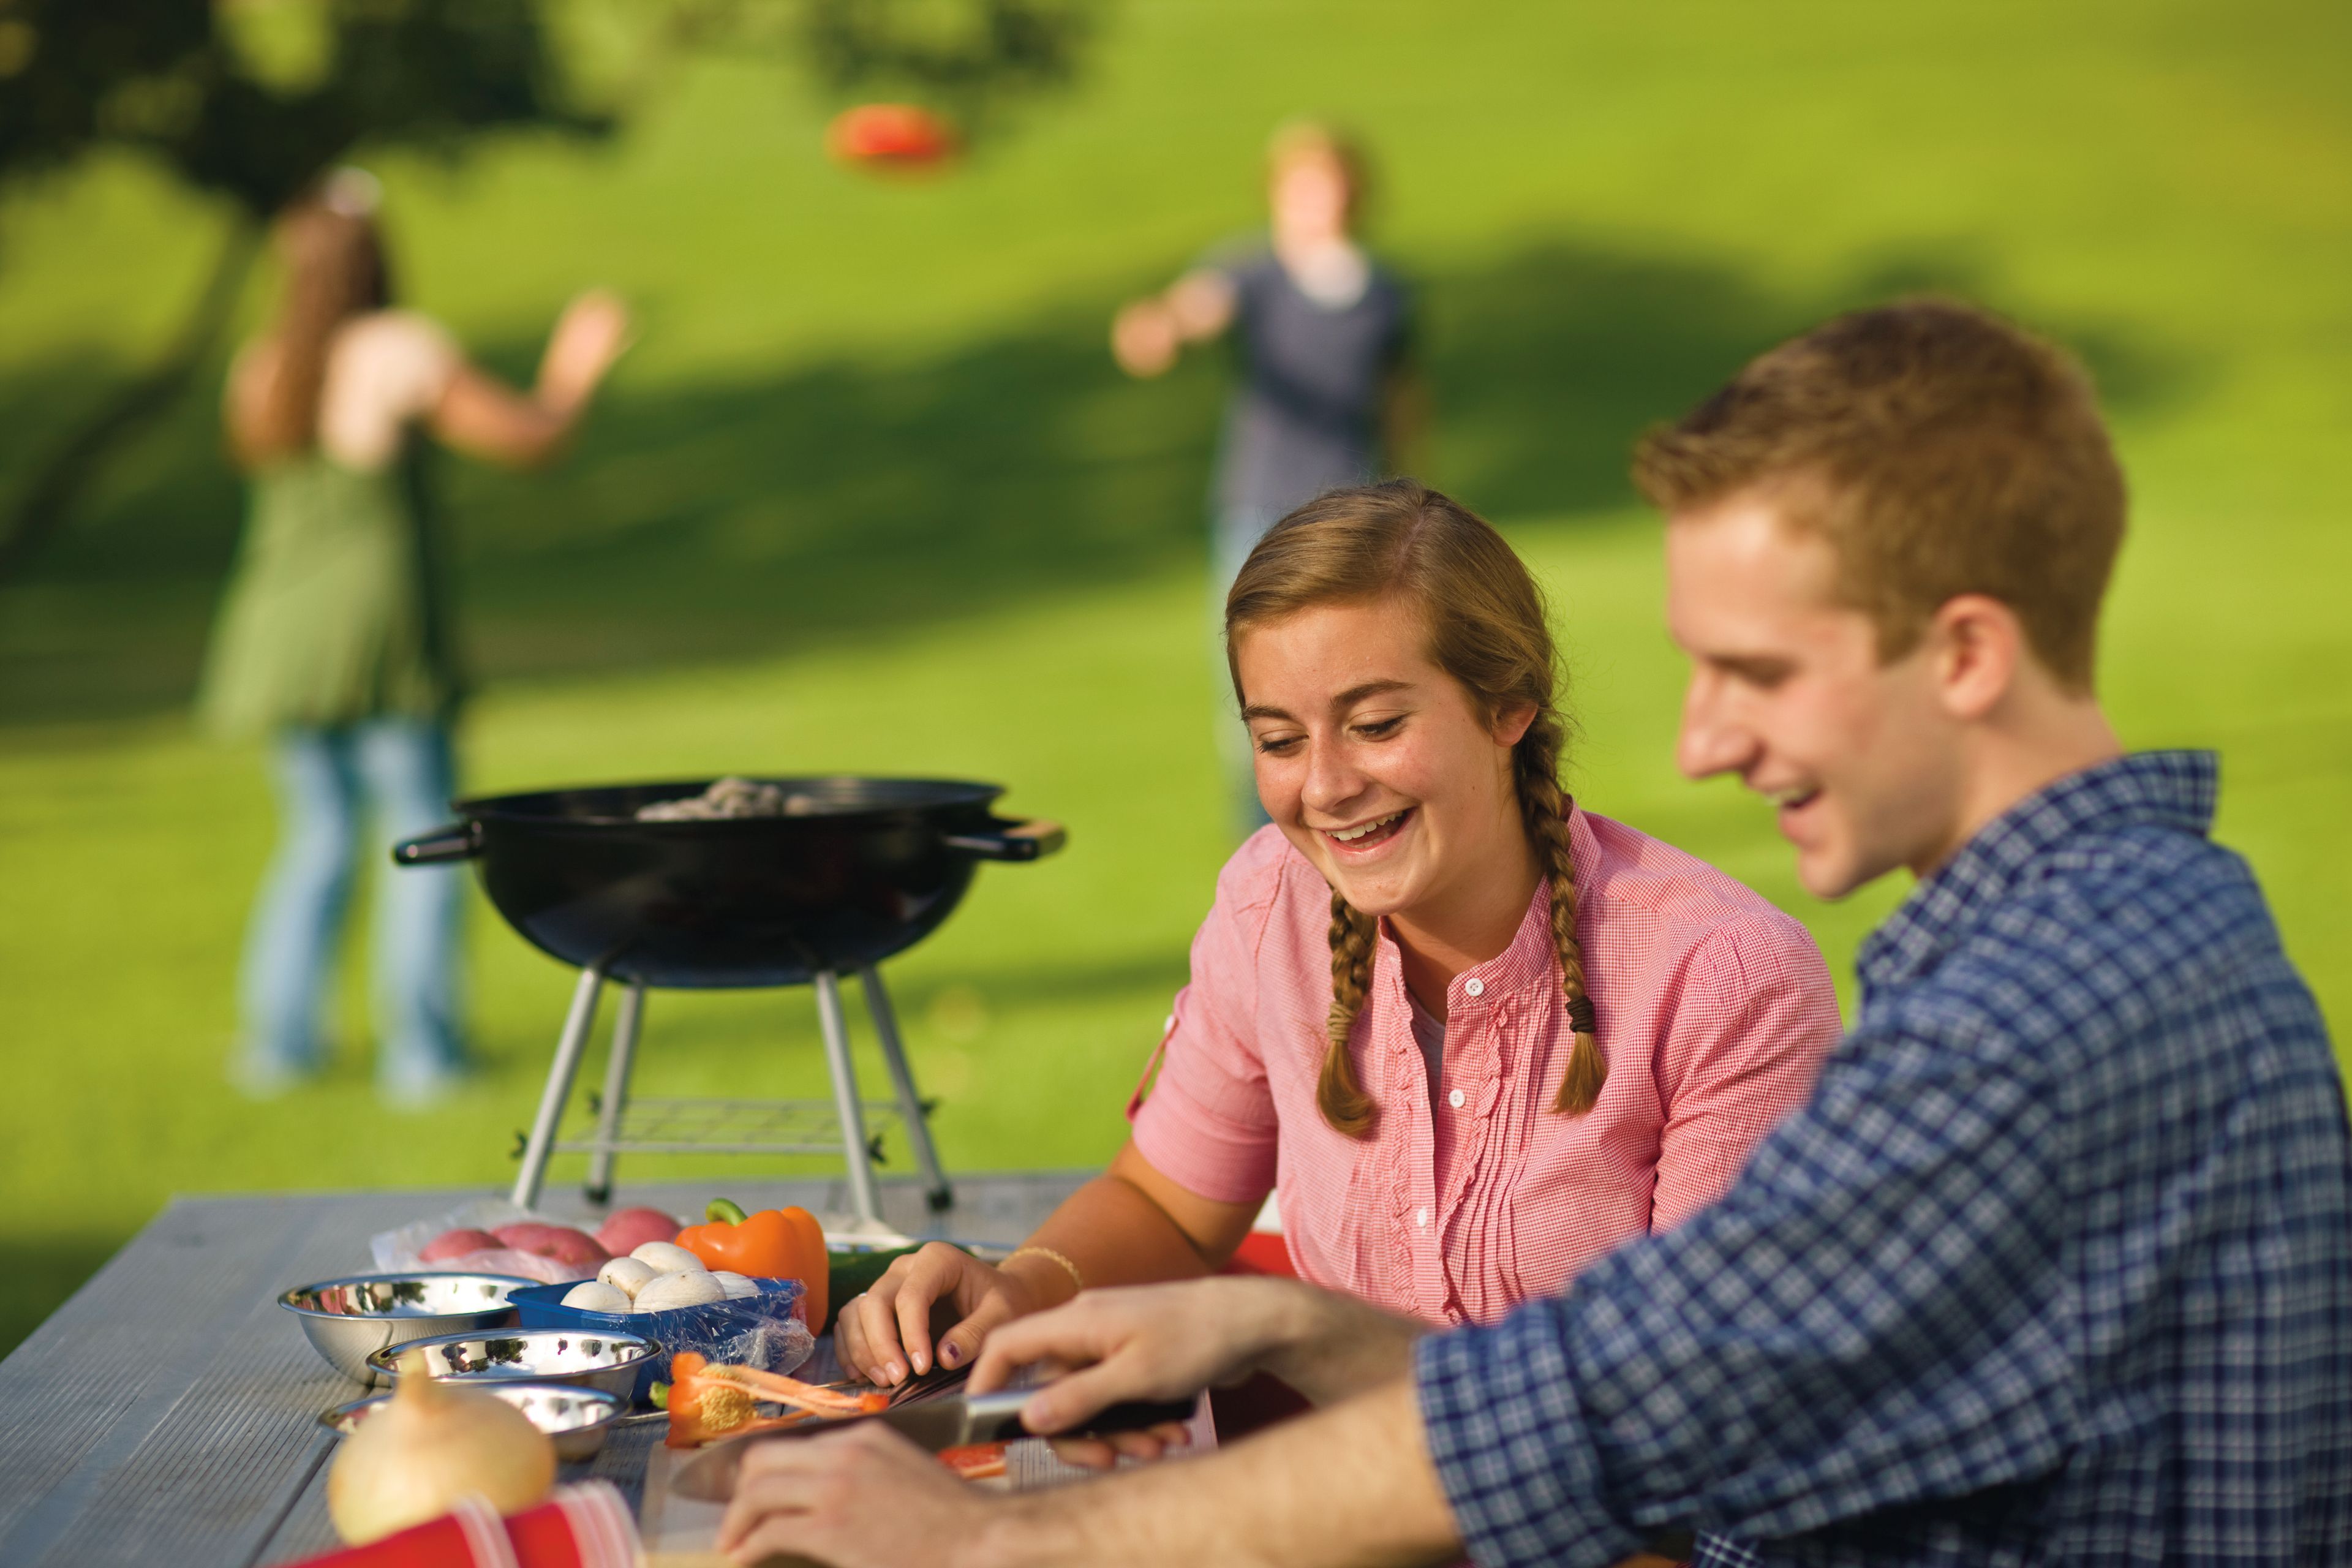 A young couple goes on a date at a barbecue.